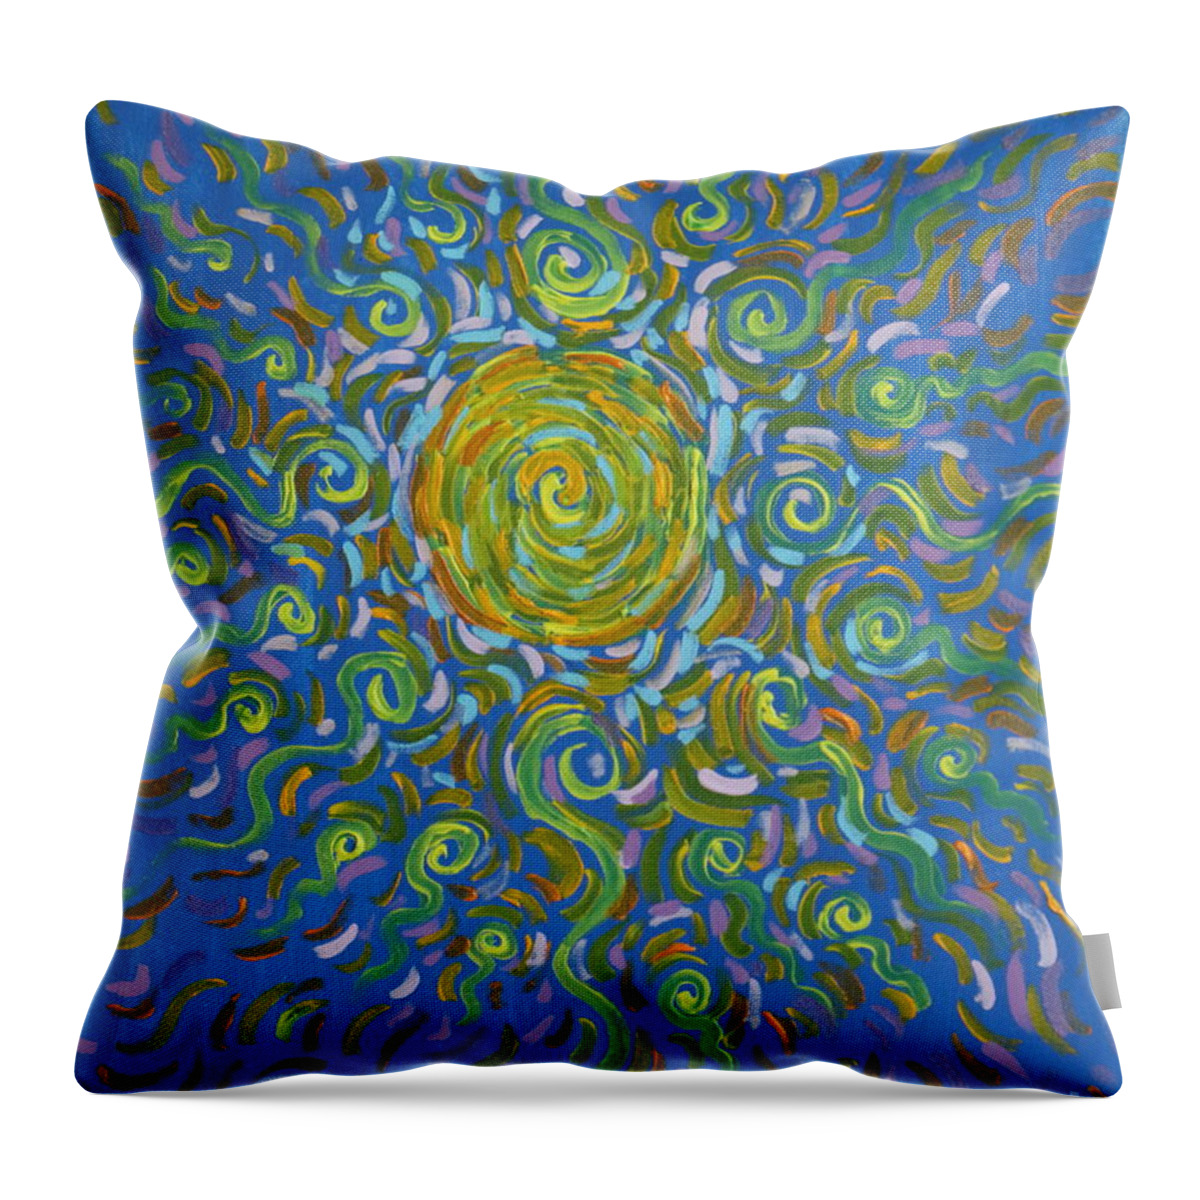 Abstract Throw Pillow featuring the painting Sun Burst Of Squiggles by Stefan Duncan